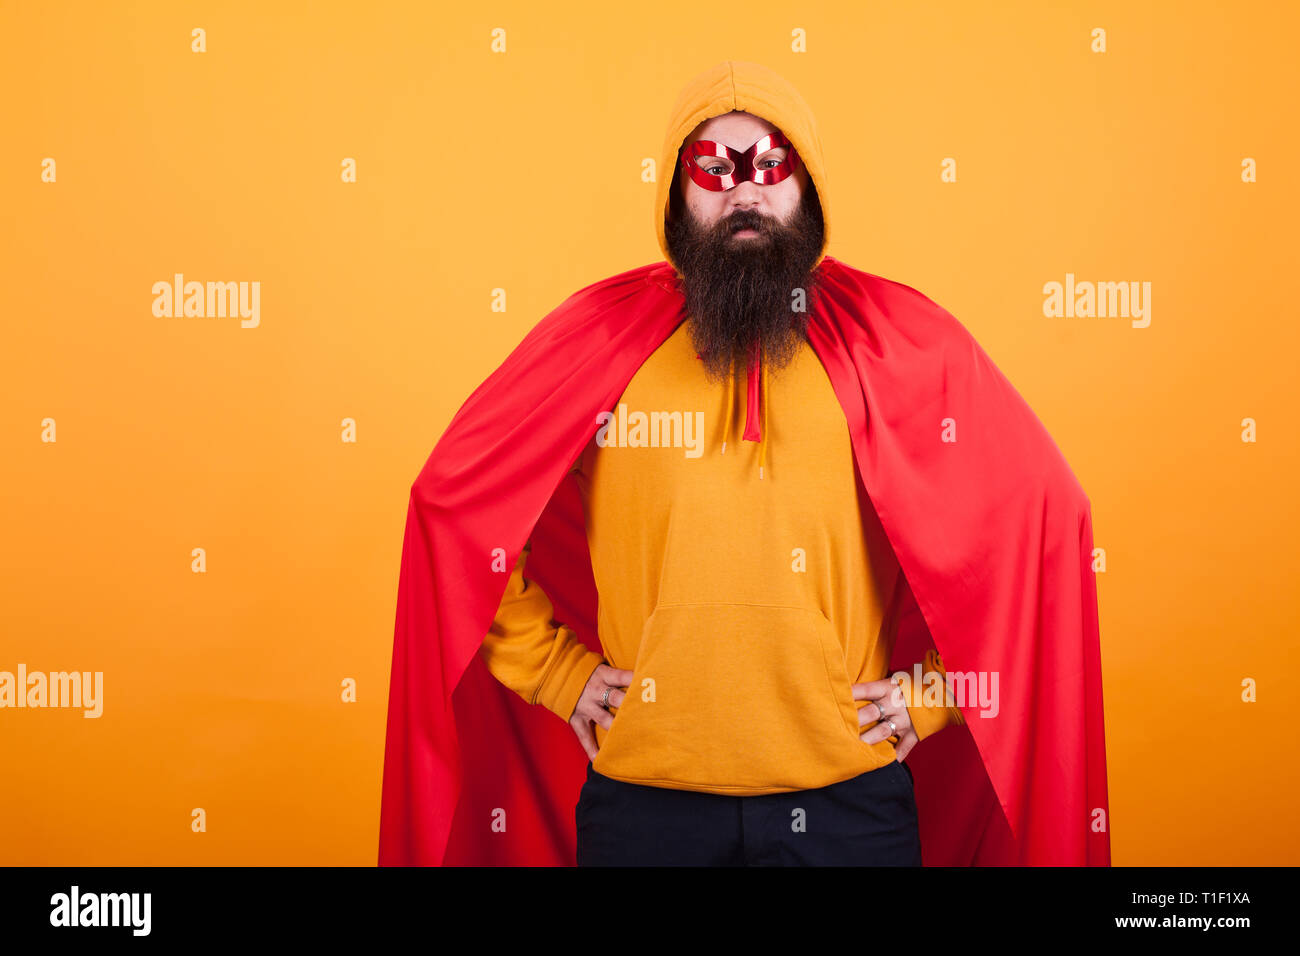 Handsome bearded man in superhero costume standing proudly over yellow background. Super power. Red cape. Long beard. Stock Photo